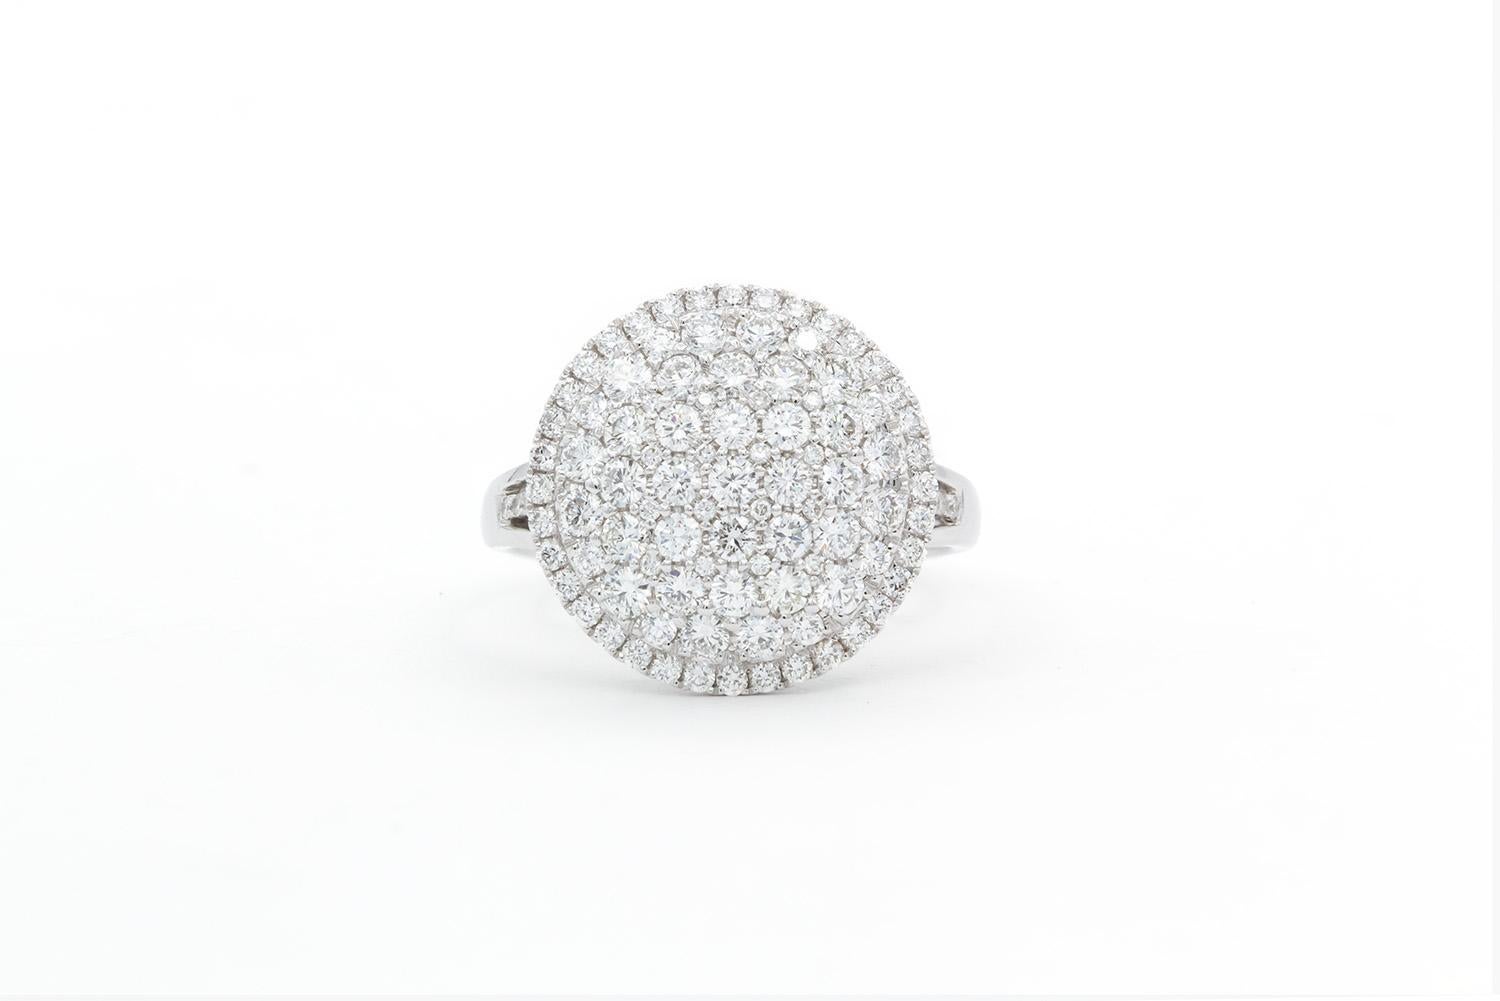 We are pleased to present this 18K White Gold & Diamond Micro Pave Dome Button Style Cocktail Ring . This beautiful ring feature an estimated 2.00ct G-H/VS-SI Round Brilliant Cut Diamonds Pave set in an 18k White Gold dome/button style cocktail